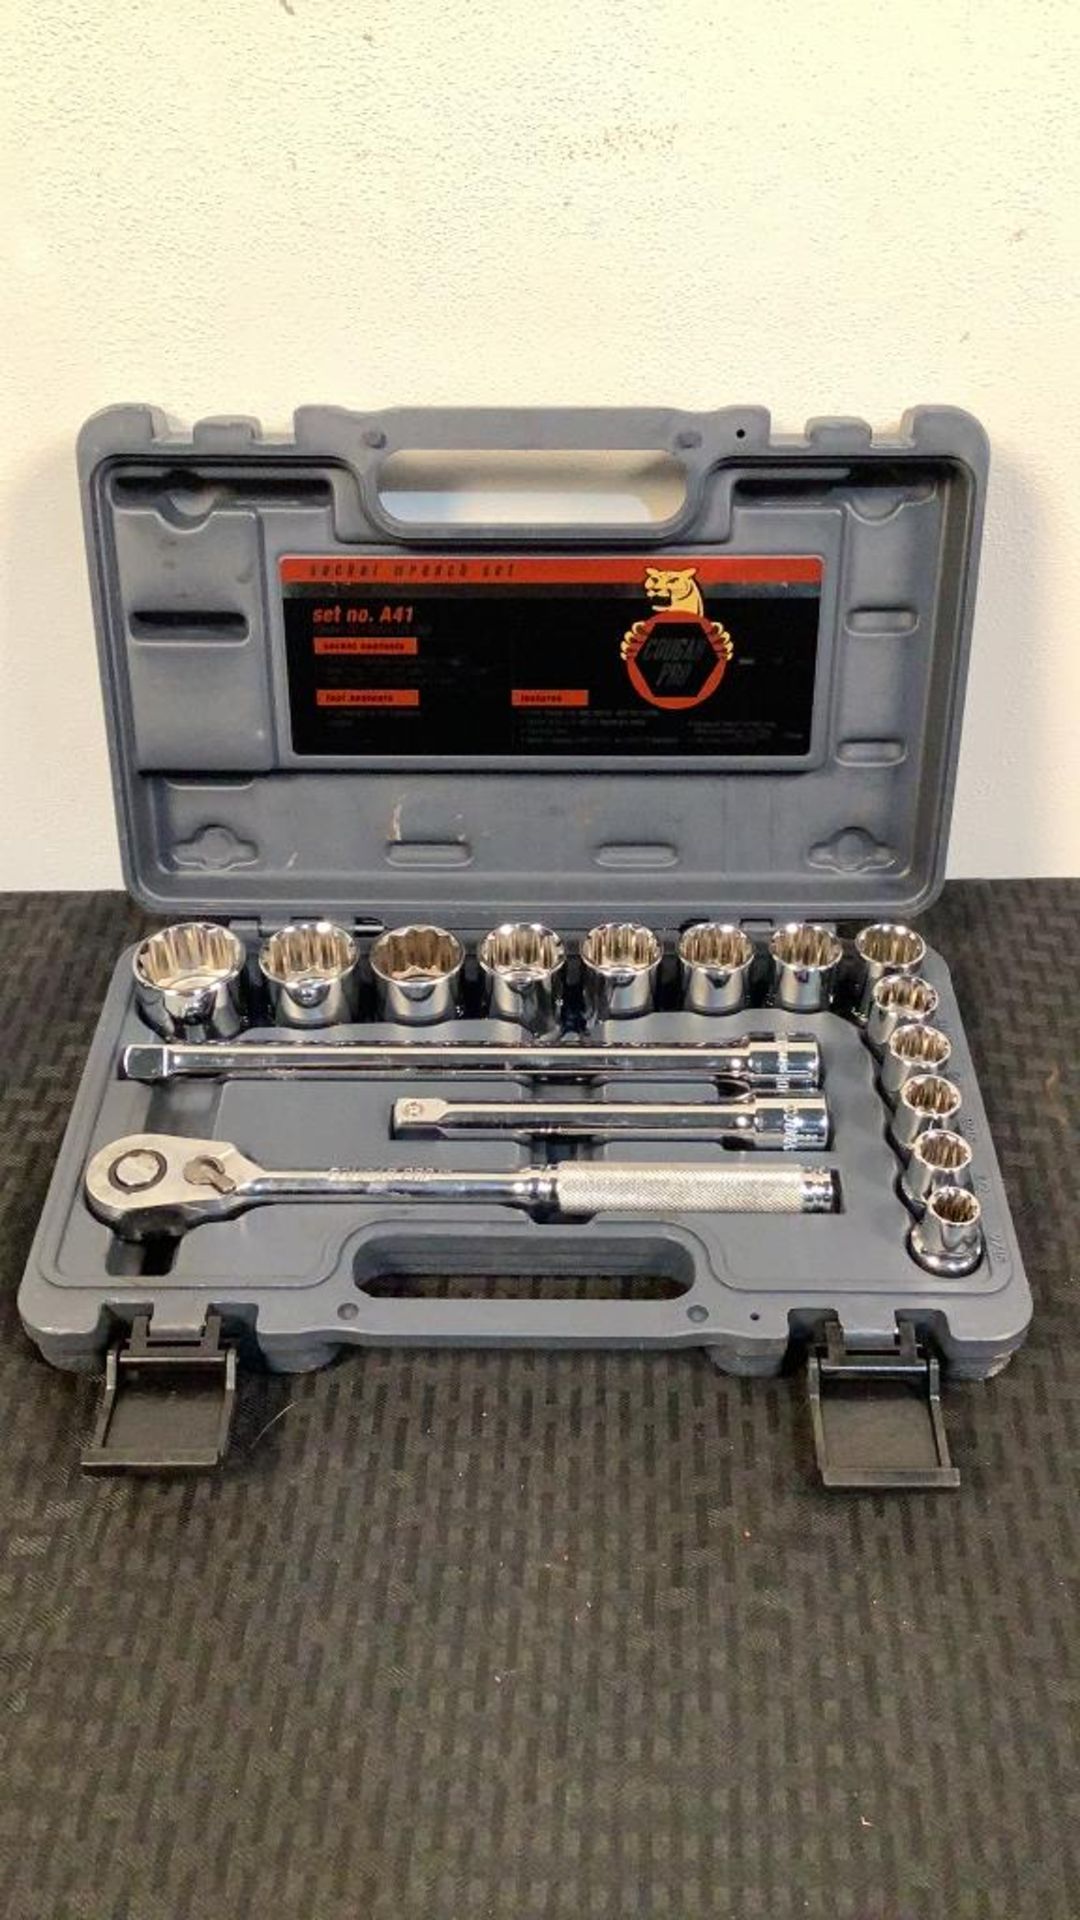 Cougar Pro 16 Piece Socket Wrench Set A41